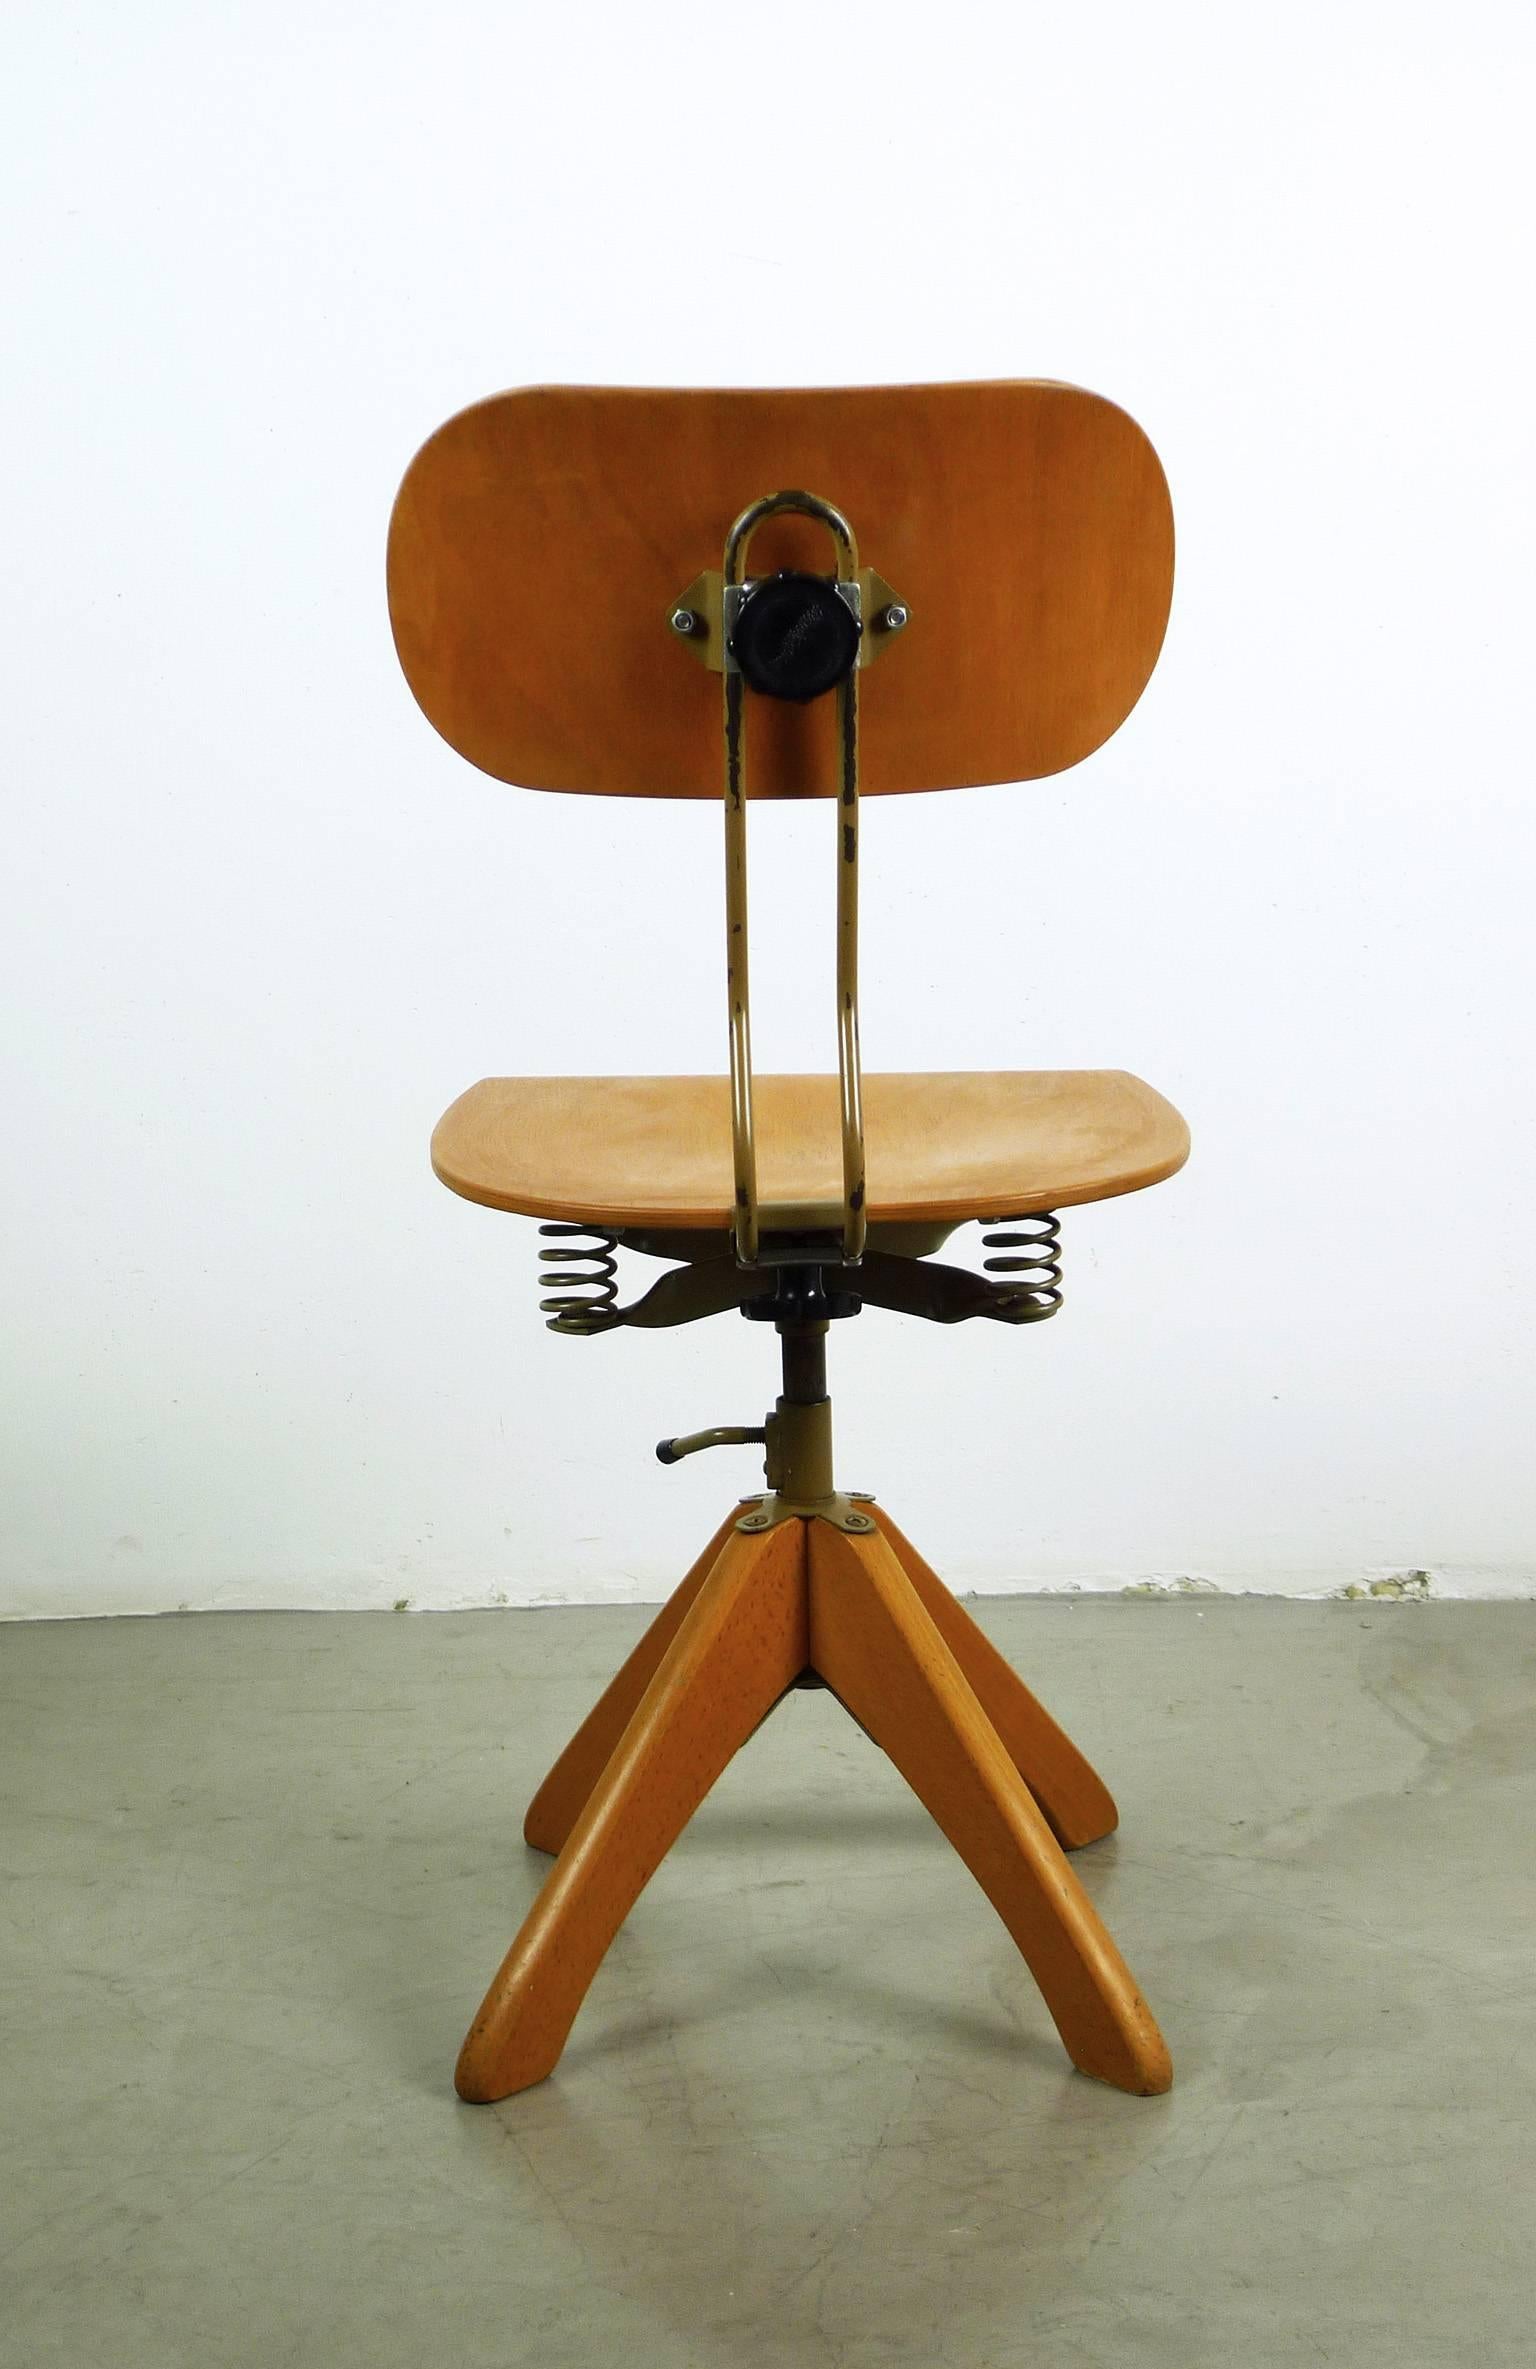 Laminated Architects Chair by Margarete Klöber for Polstergleich, Germany, 1930s